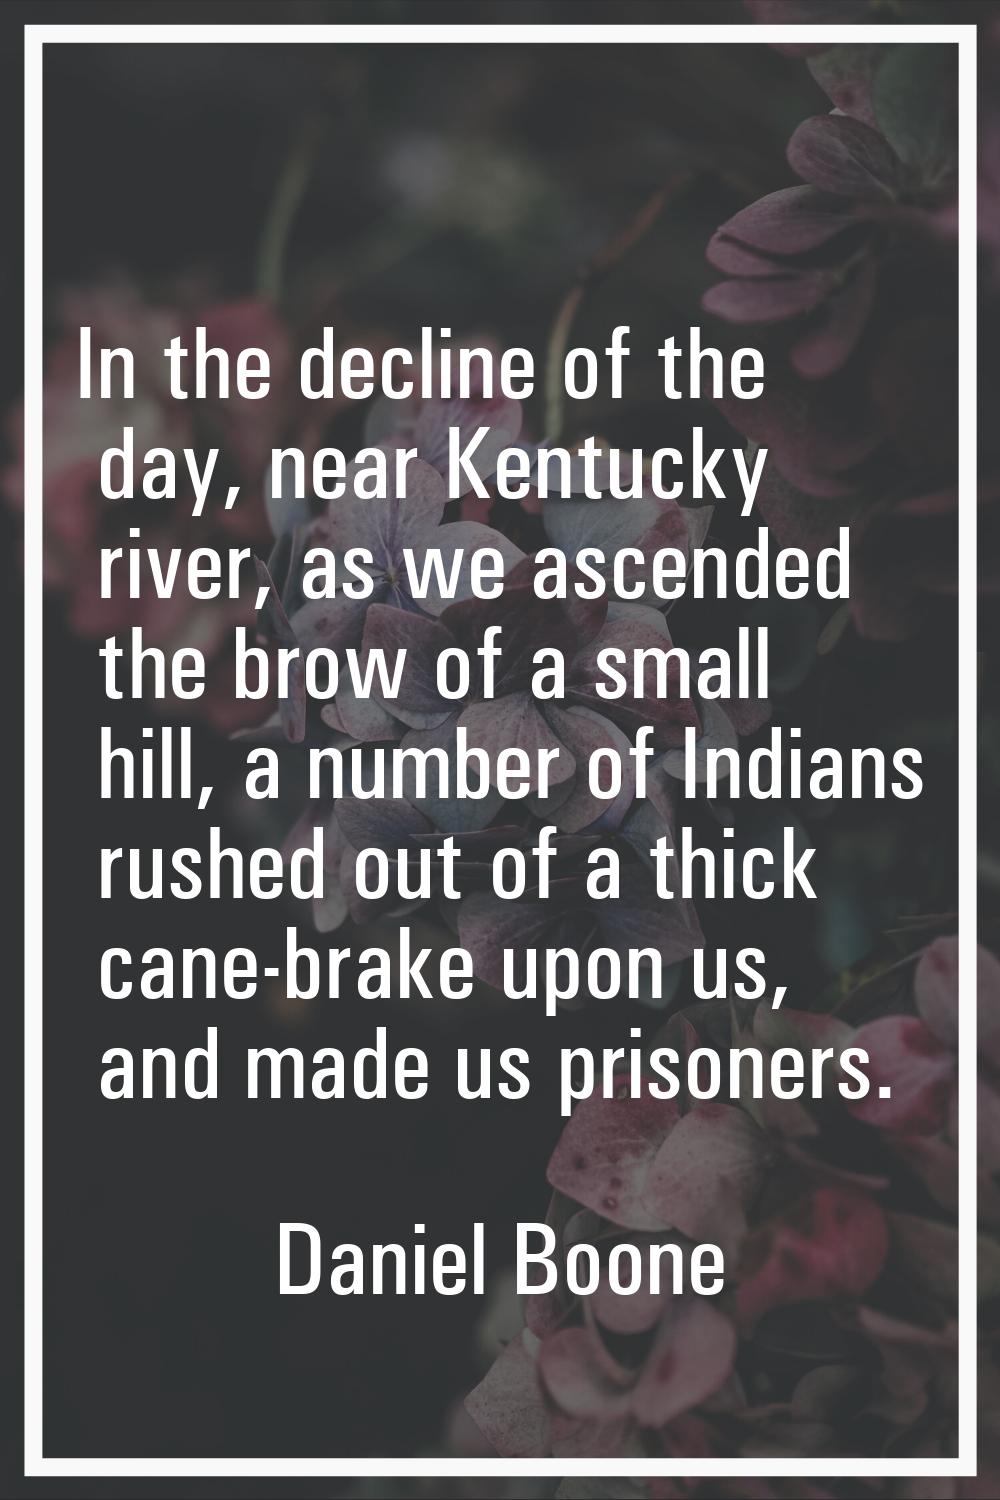 In the decline of the day, near Kentucky river, as we ascended the brow of a small hill, a number o